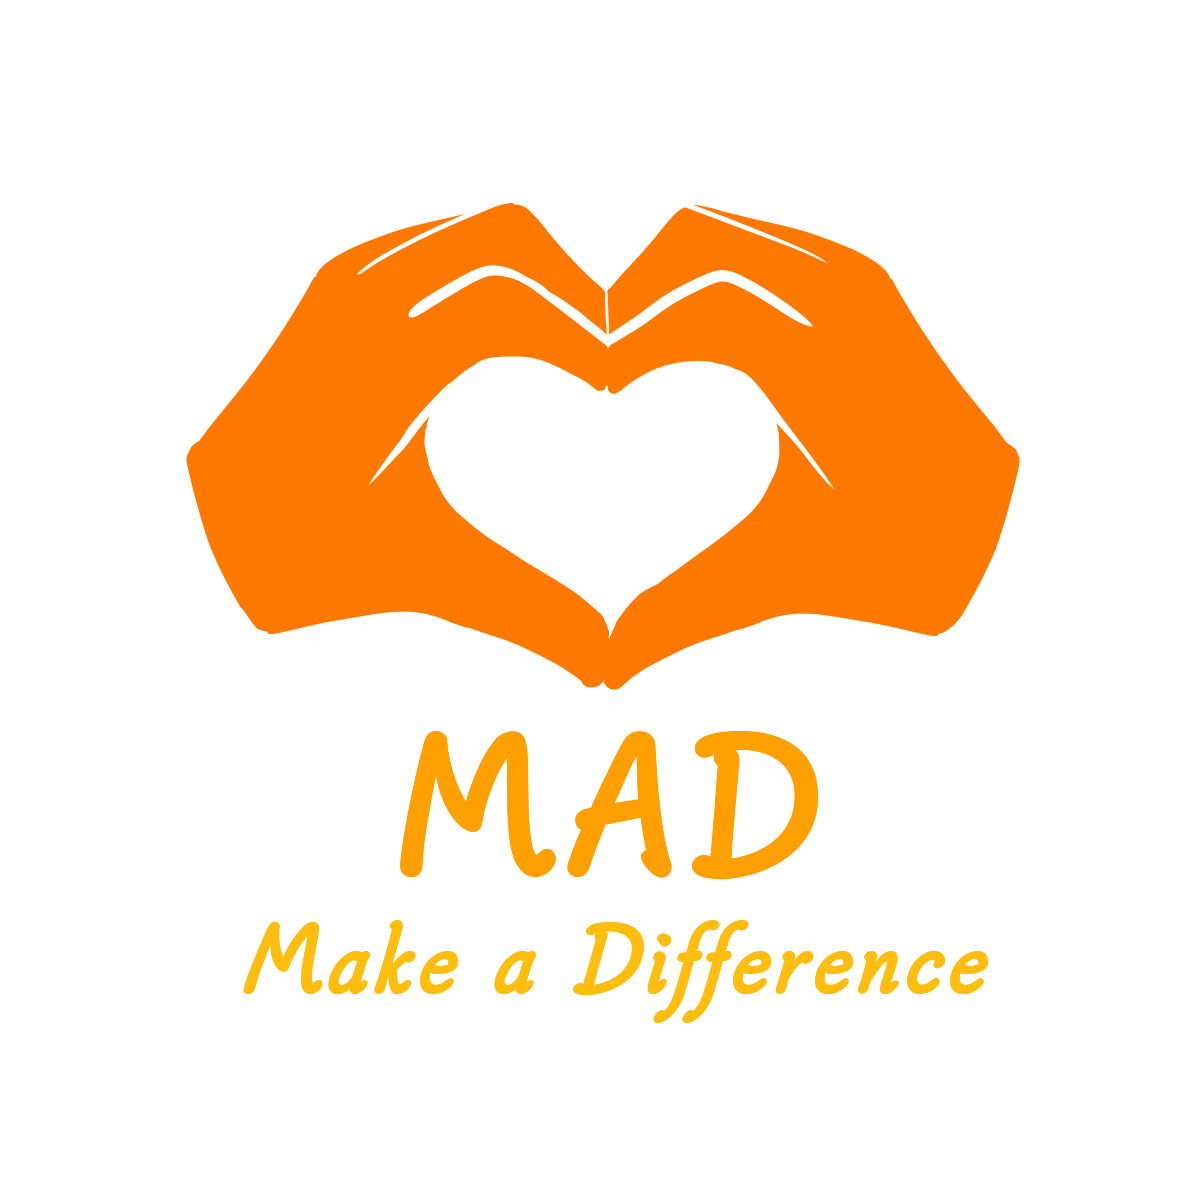 The Make a Difference Movement Foundation logo